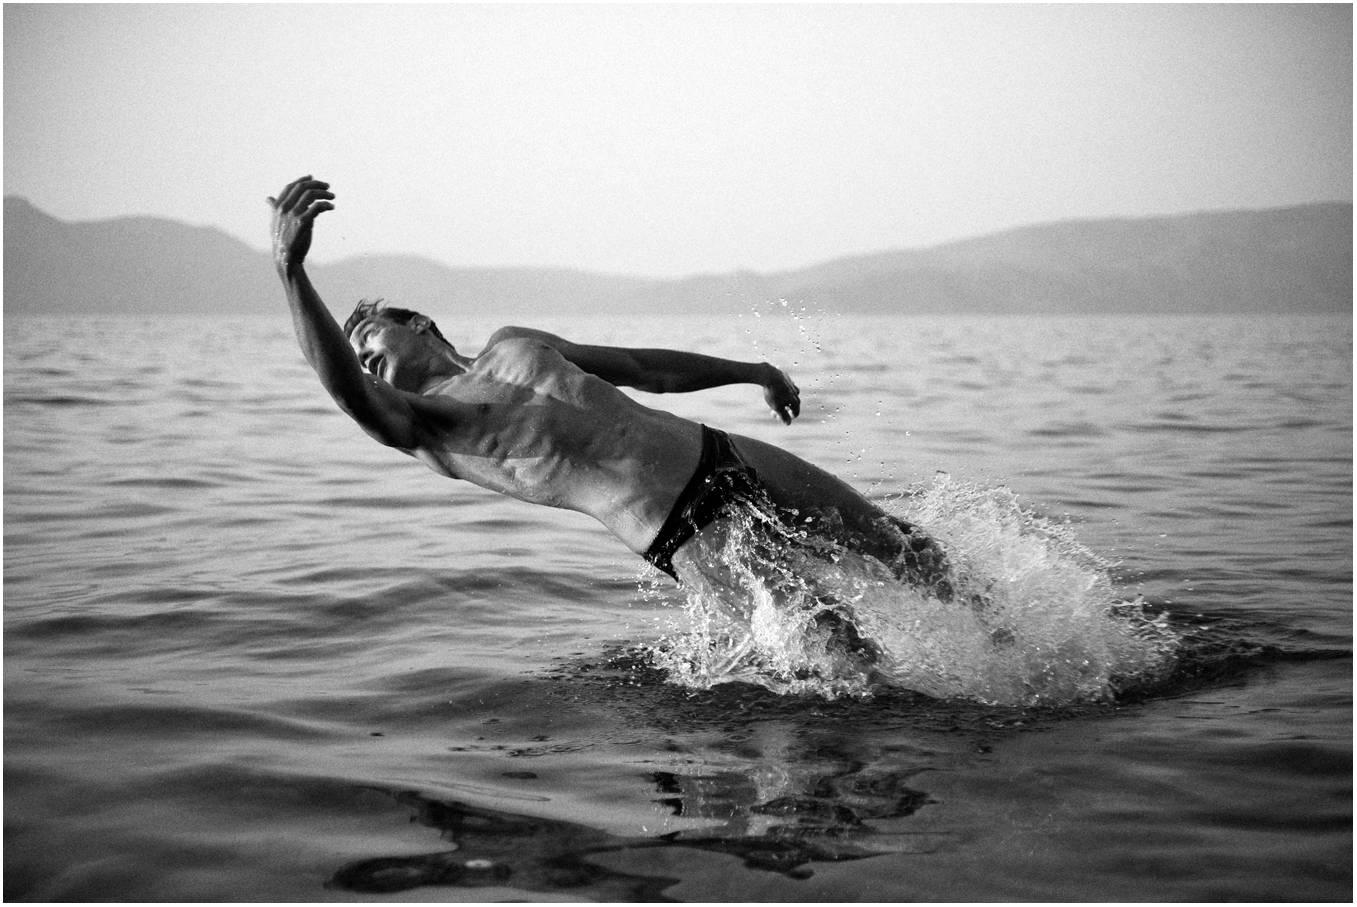 Kim de Molenaer is a contemporary photographer based in Belgium and Greece. His works are reminiscent of Sally Mann, Jock Sturges, and Bruce Weber. He captures his human subjects in moments of vulnerability, either staged or improvised, and places